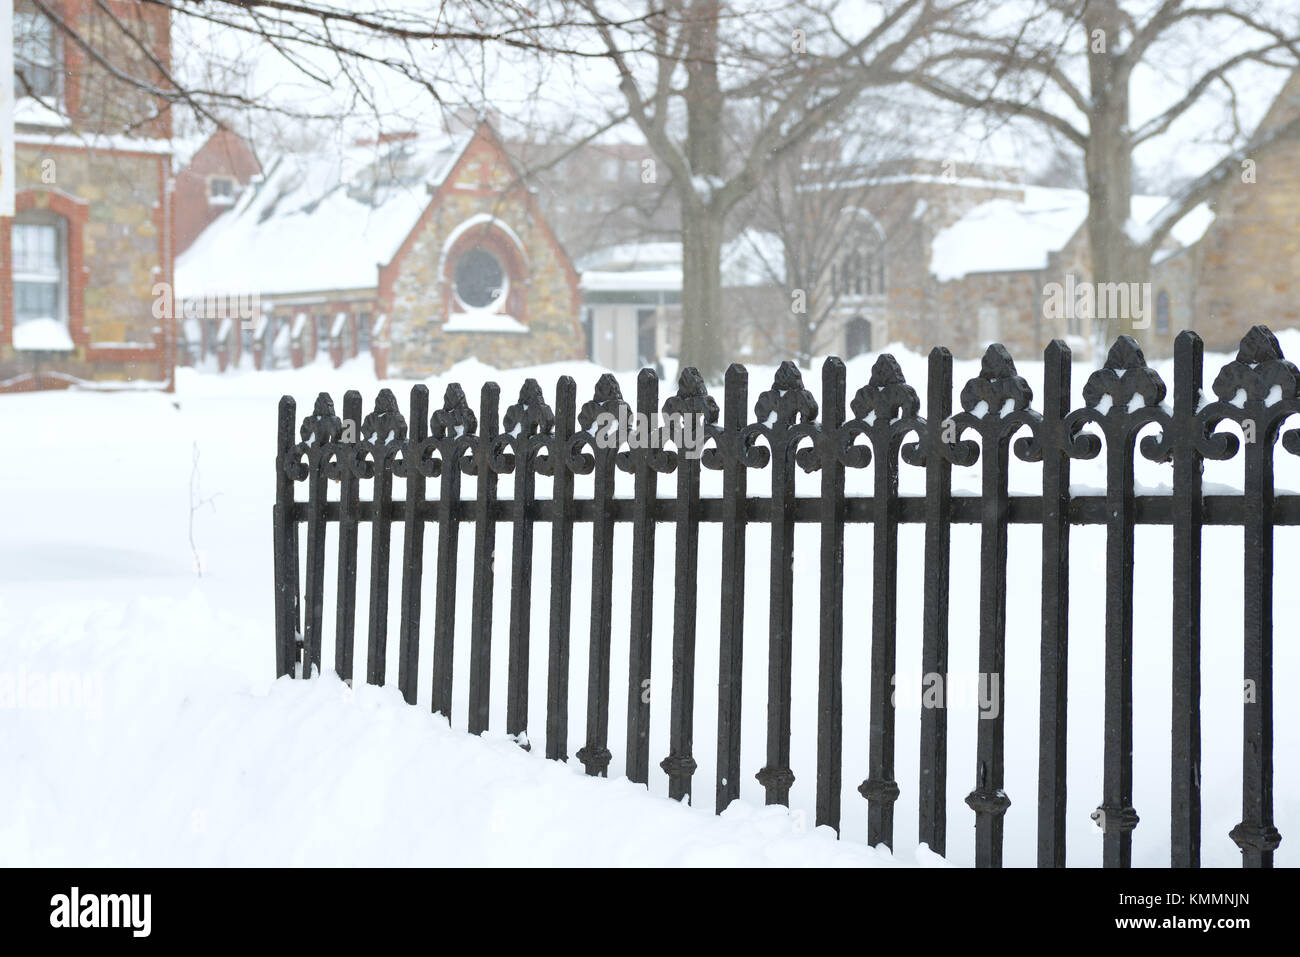 Cast iron fence burried in snow. Winter background Stock Photo